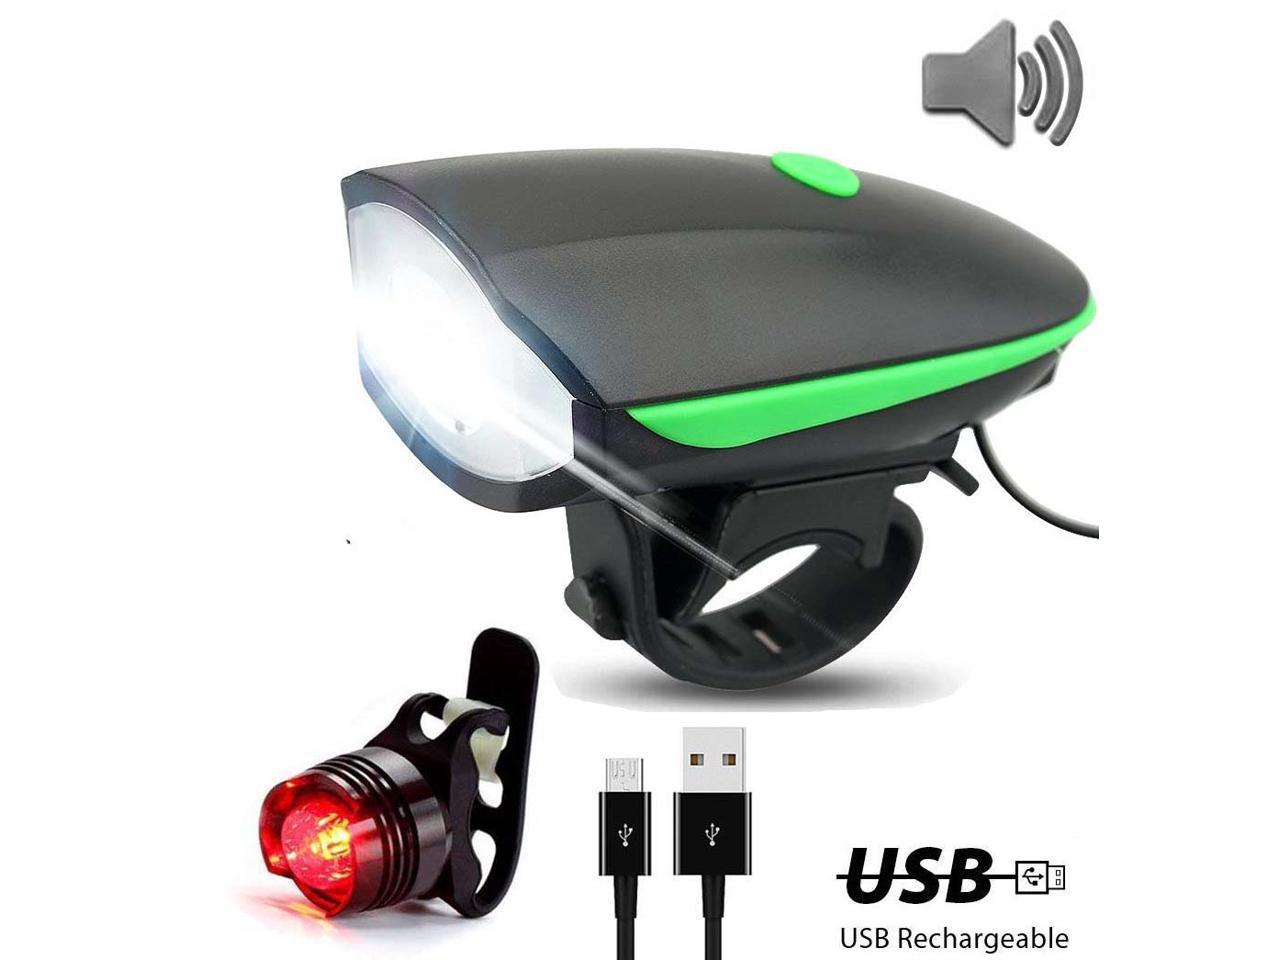 Details about   USB Rechargeable LED Bicycle Headlight Bike Head Light Front Lamp Cycling Horn 